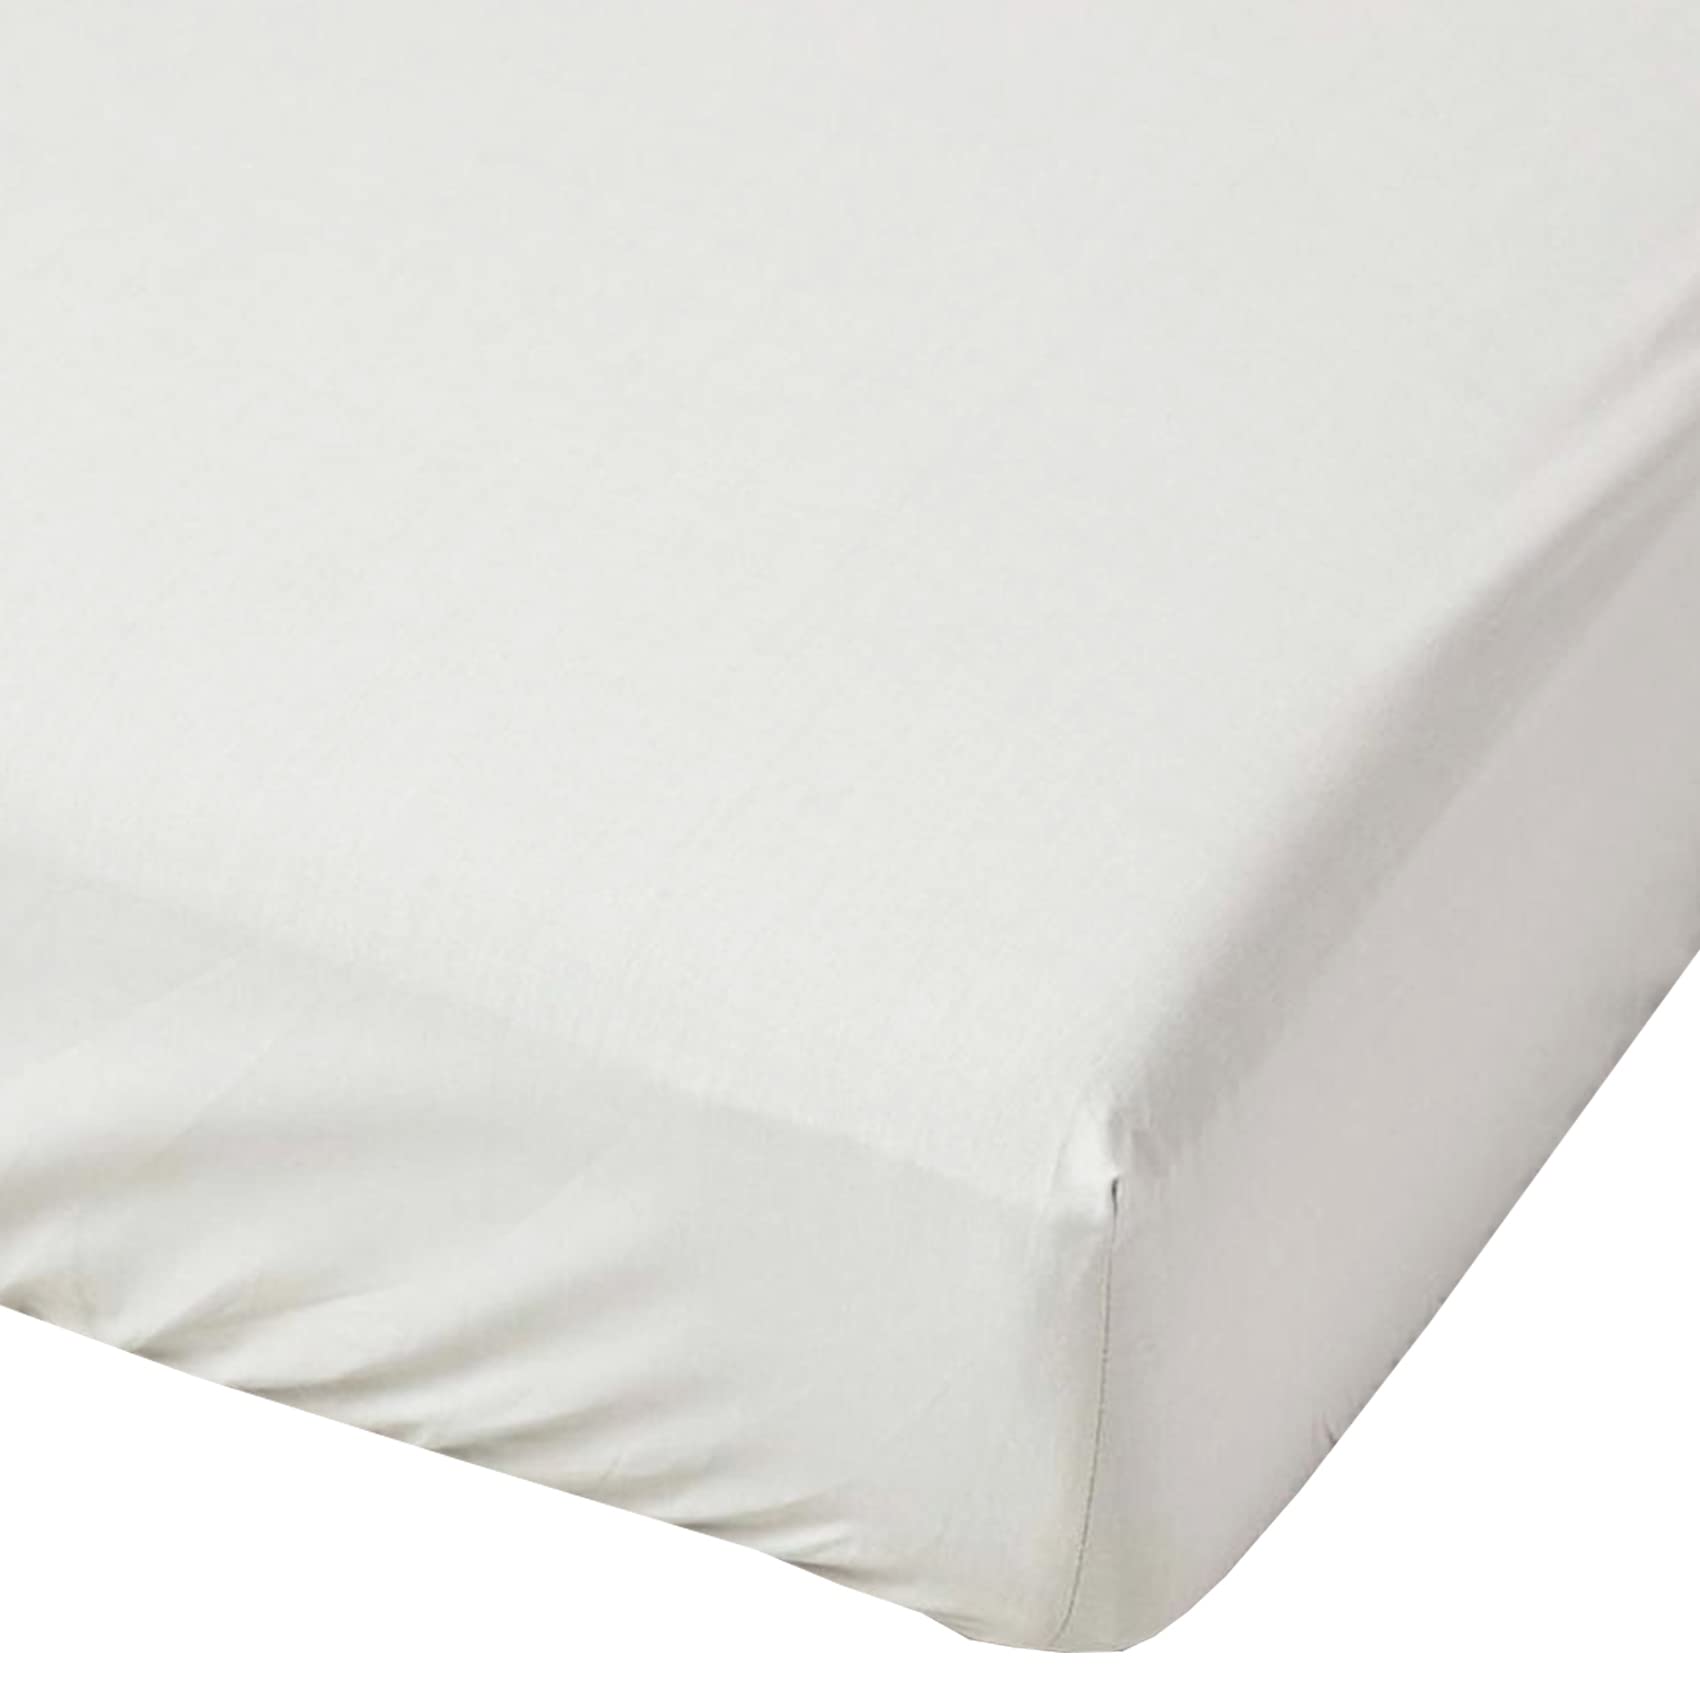 Brit Cotton Double Fitted Sheet 40CM/16" Extra Deep Easycare & Long-Lasting, Breathable Polycotton Bed Sheets (WHITE, DOUBLE / 40 CM)